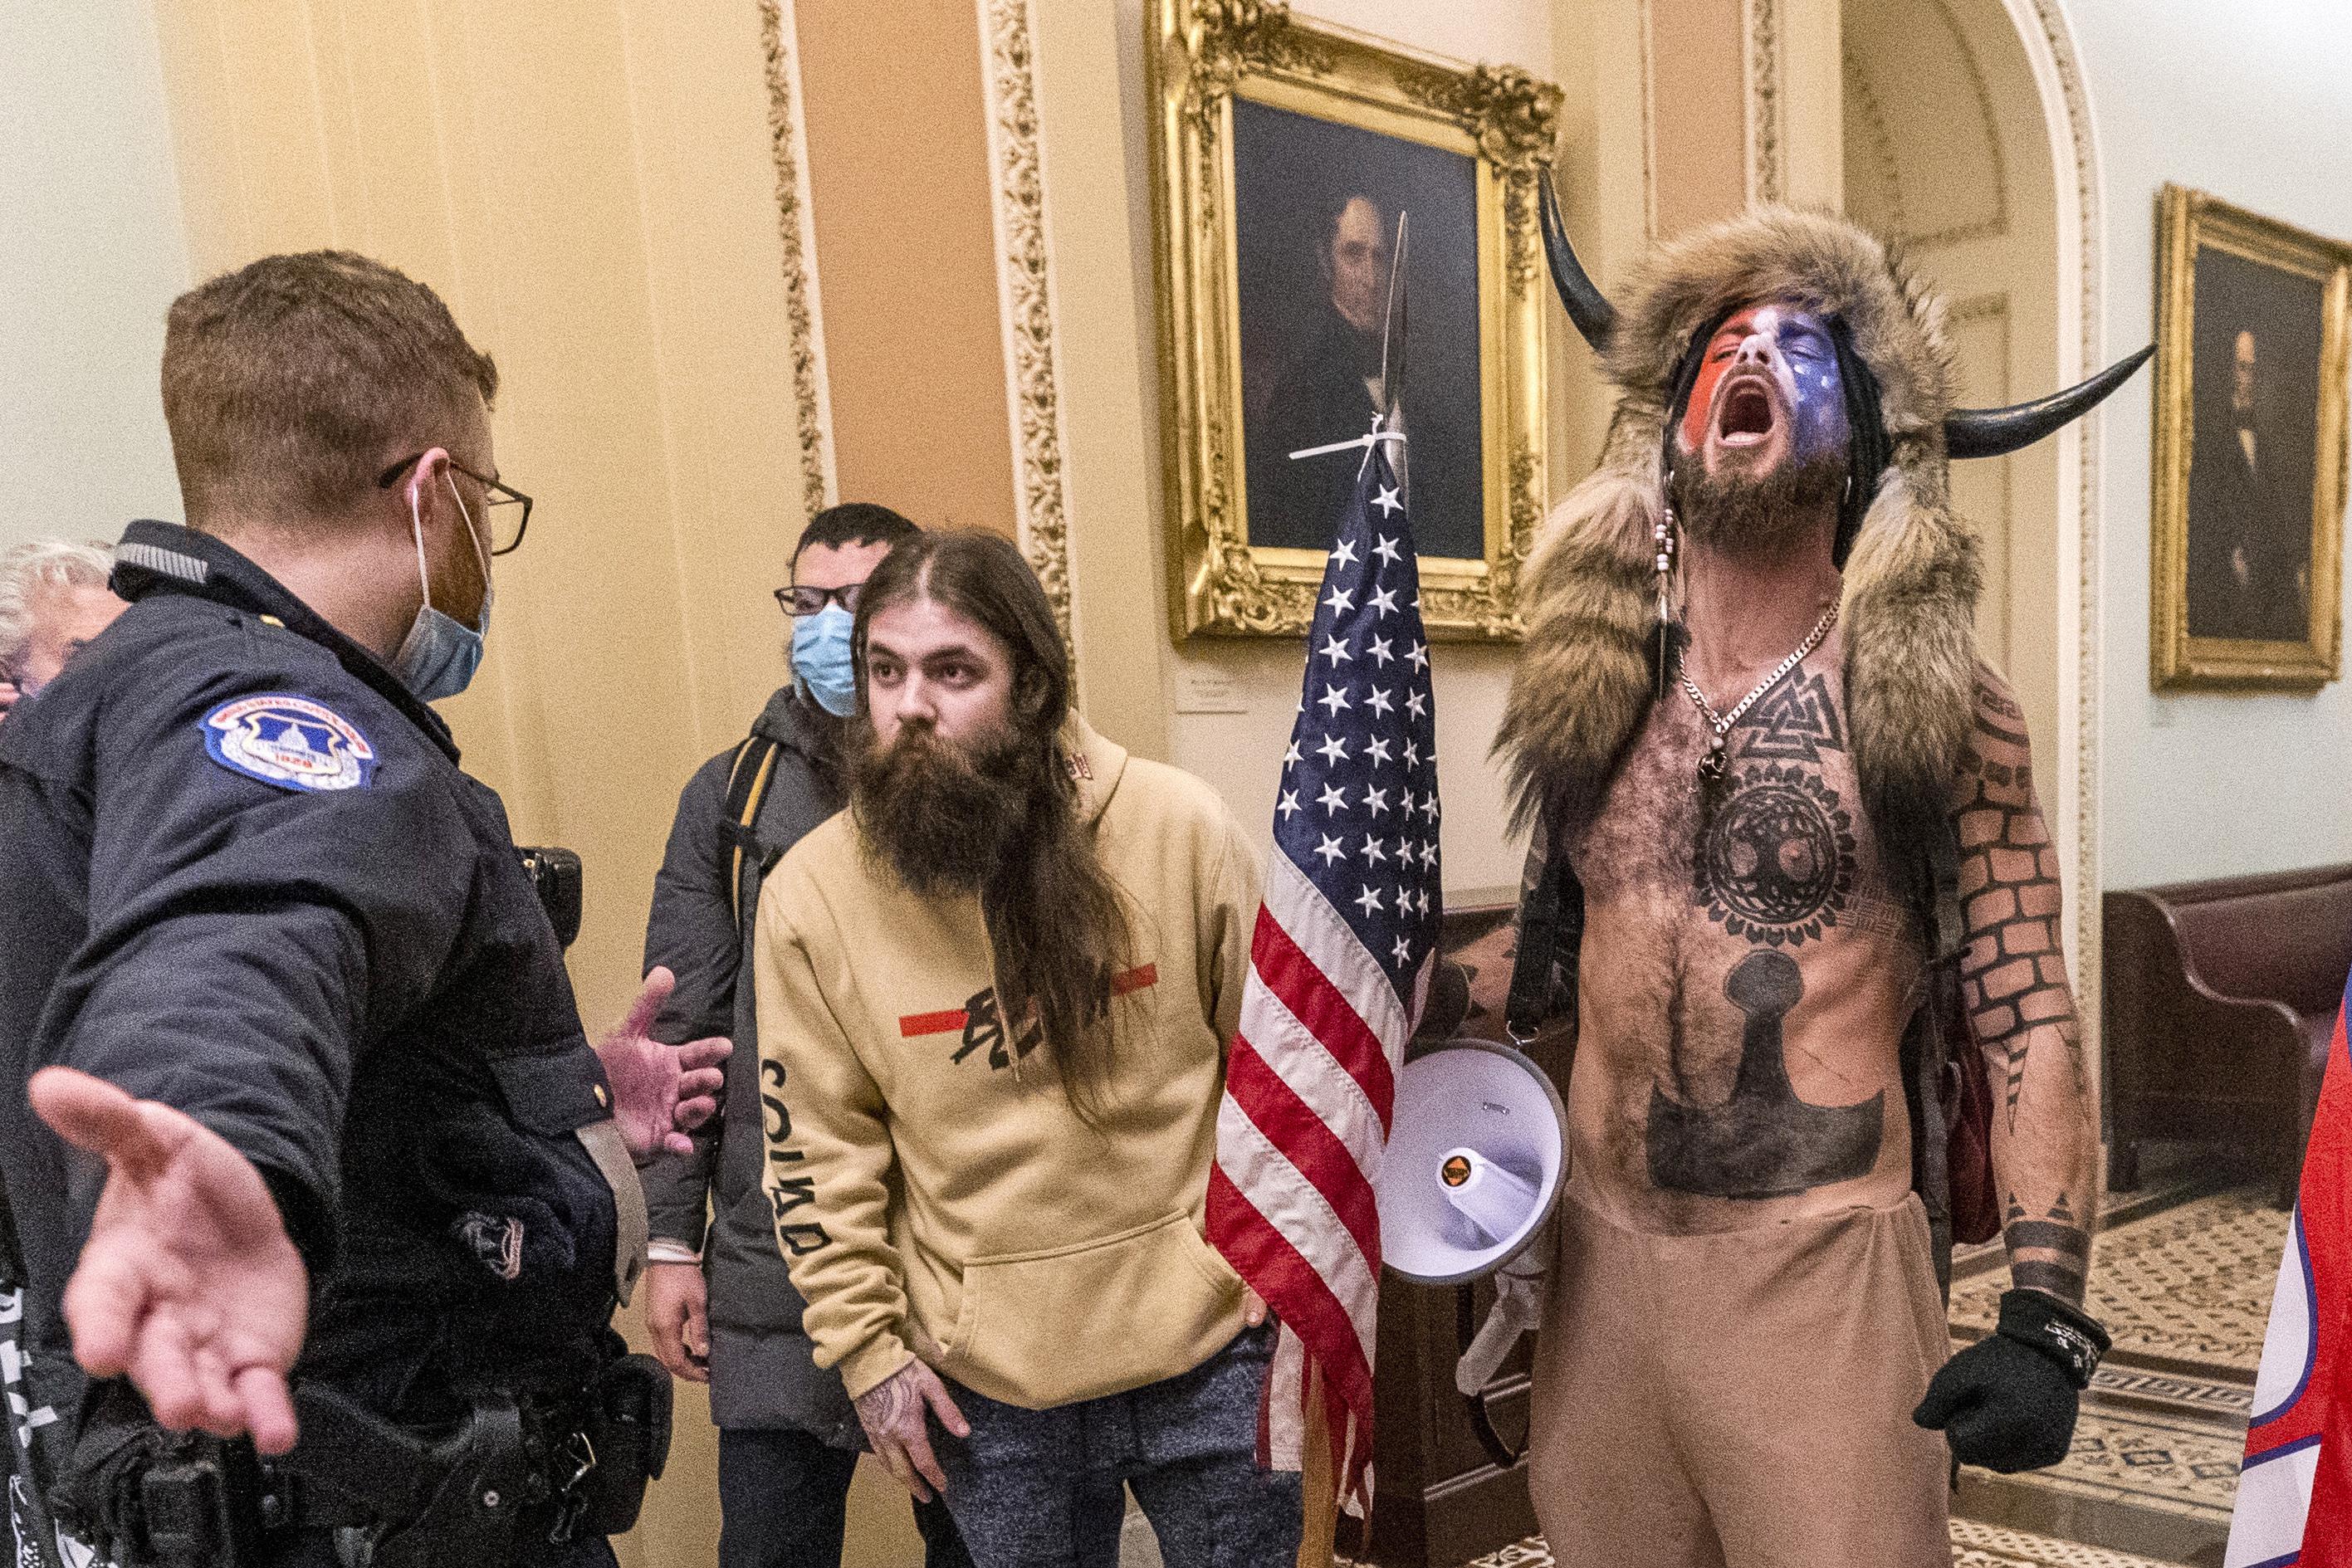 Man wearing horns during riot apologizes for storming Capitol